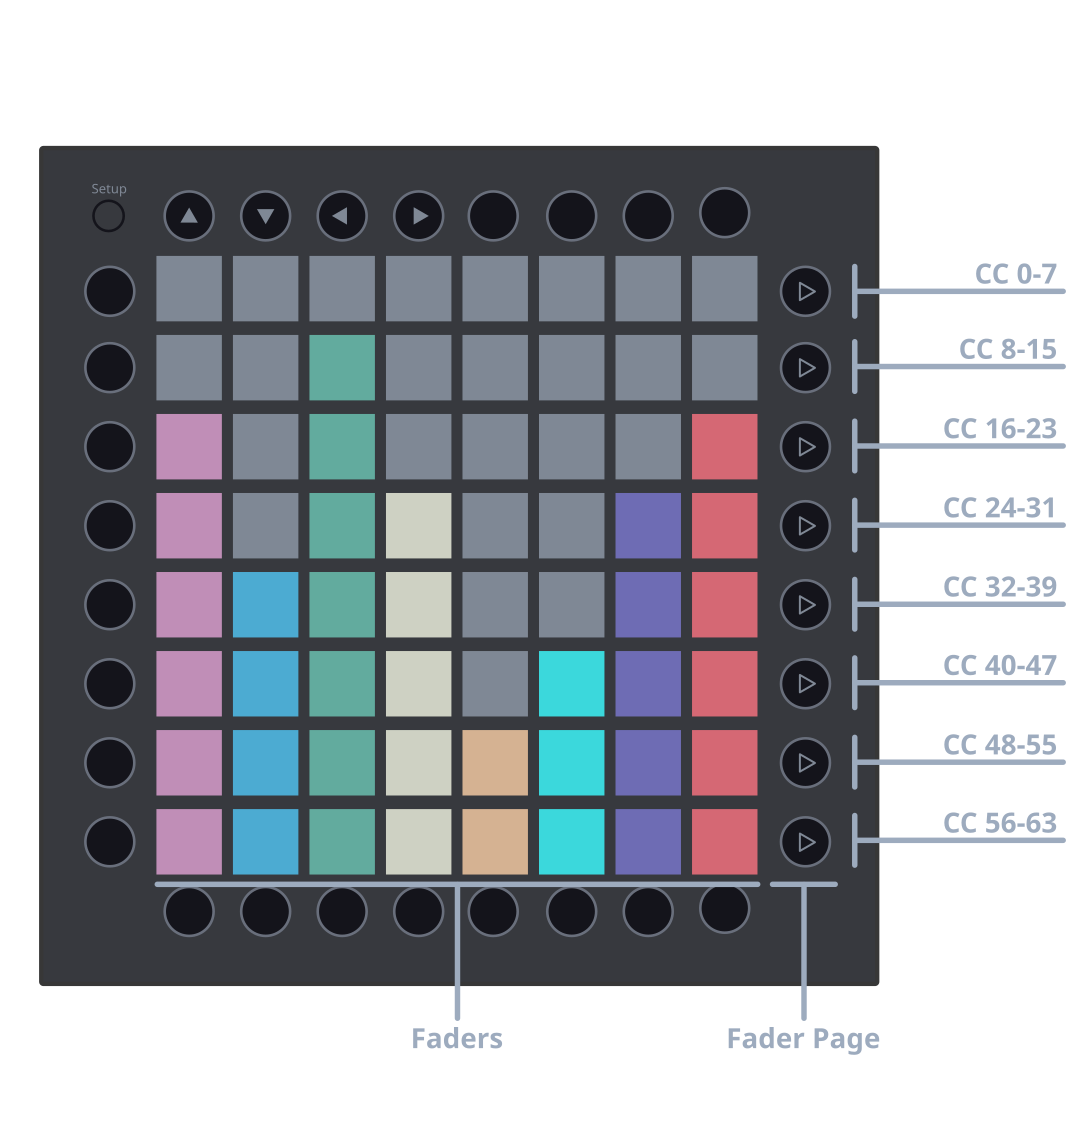 Launchpad Pro Showing the faders page for this custom firmware